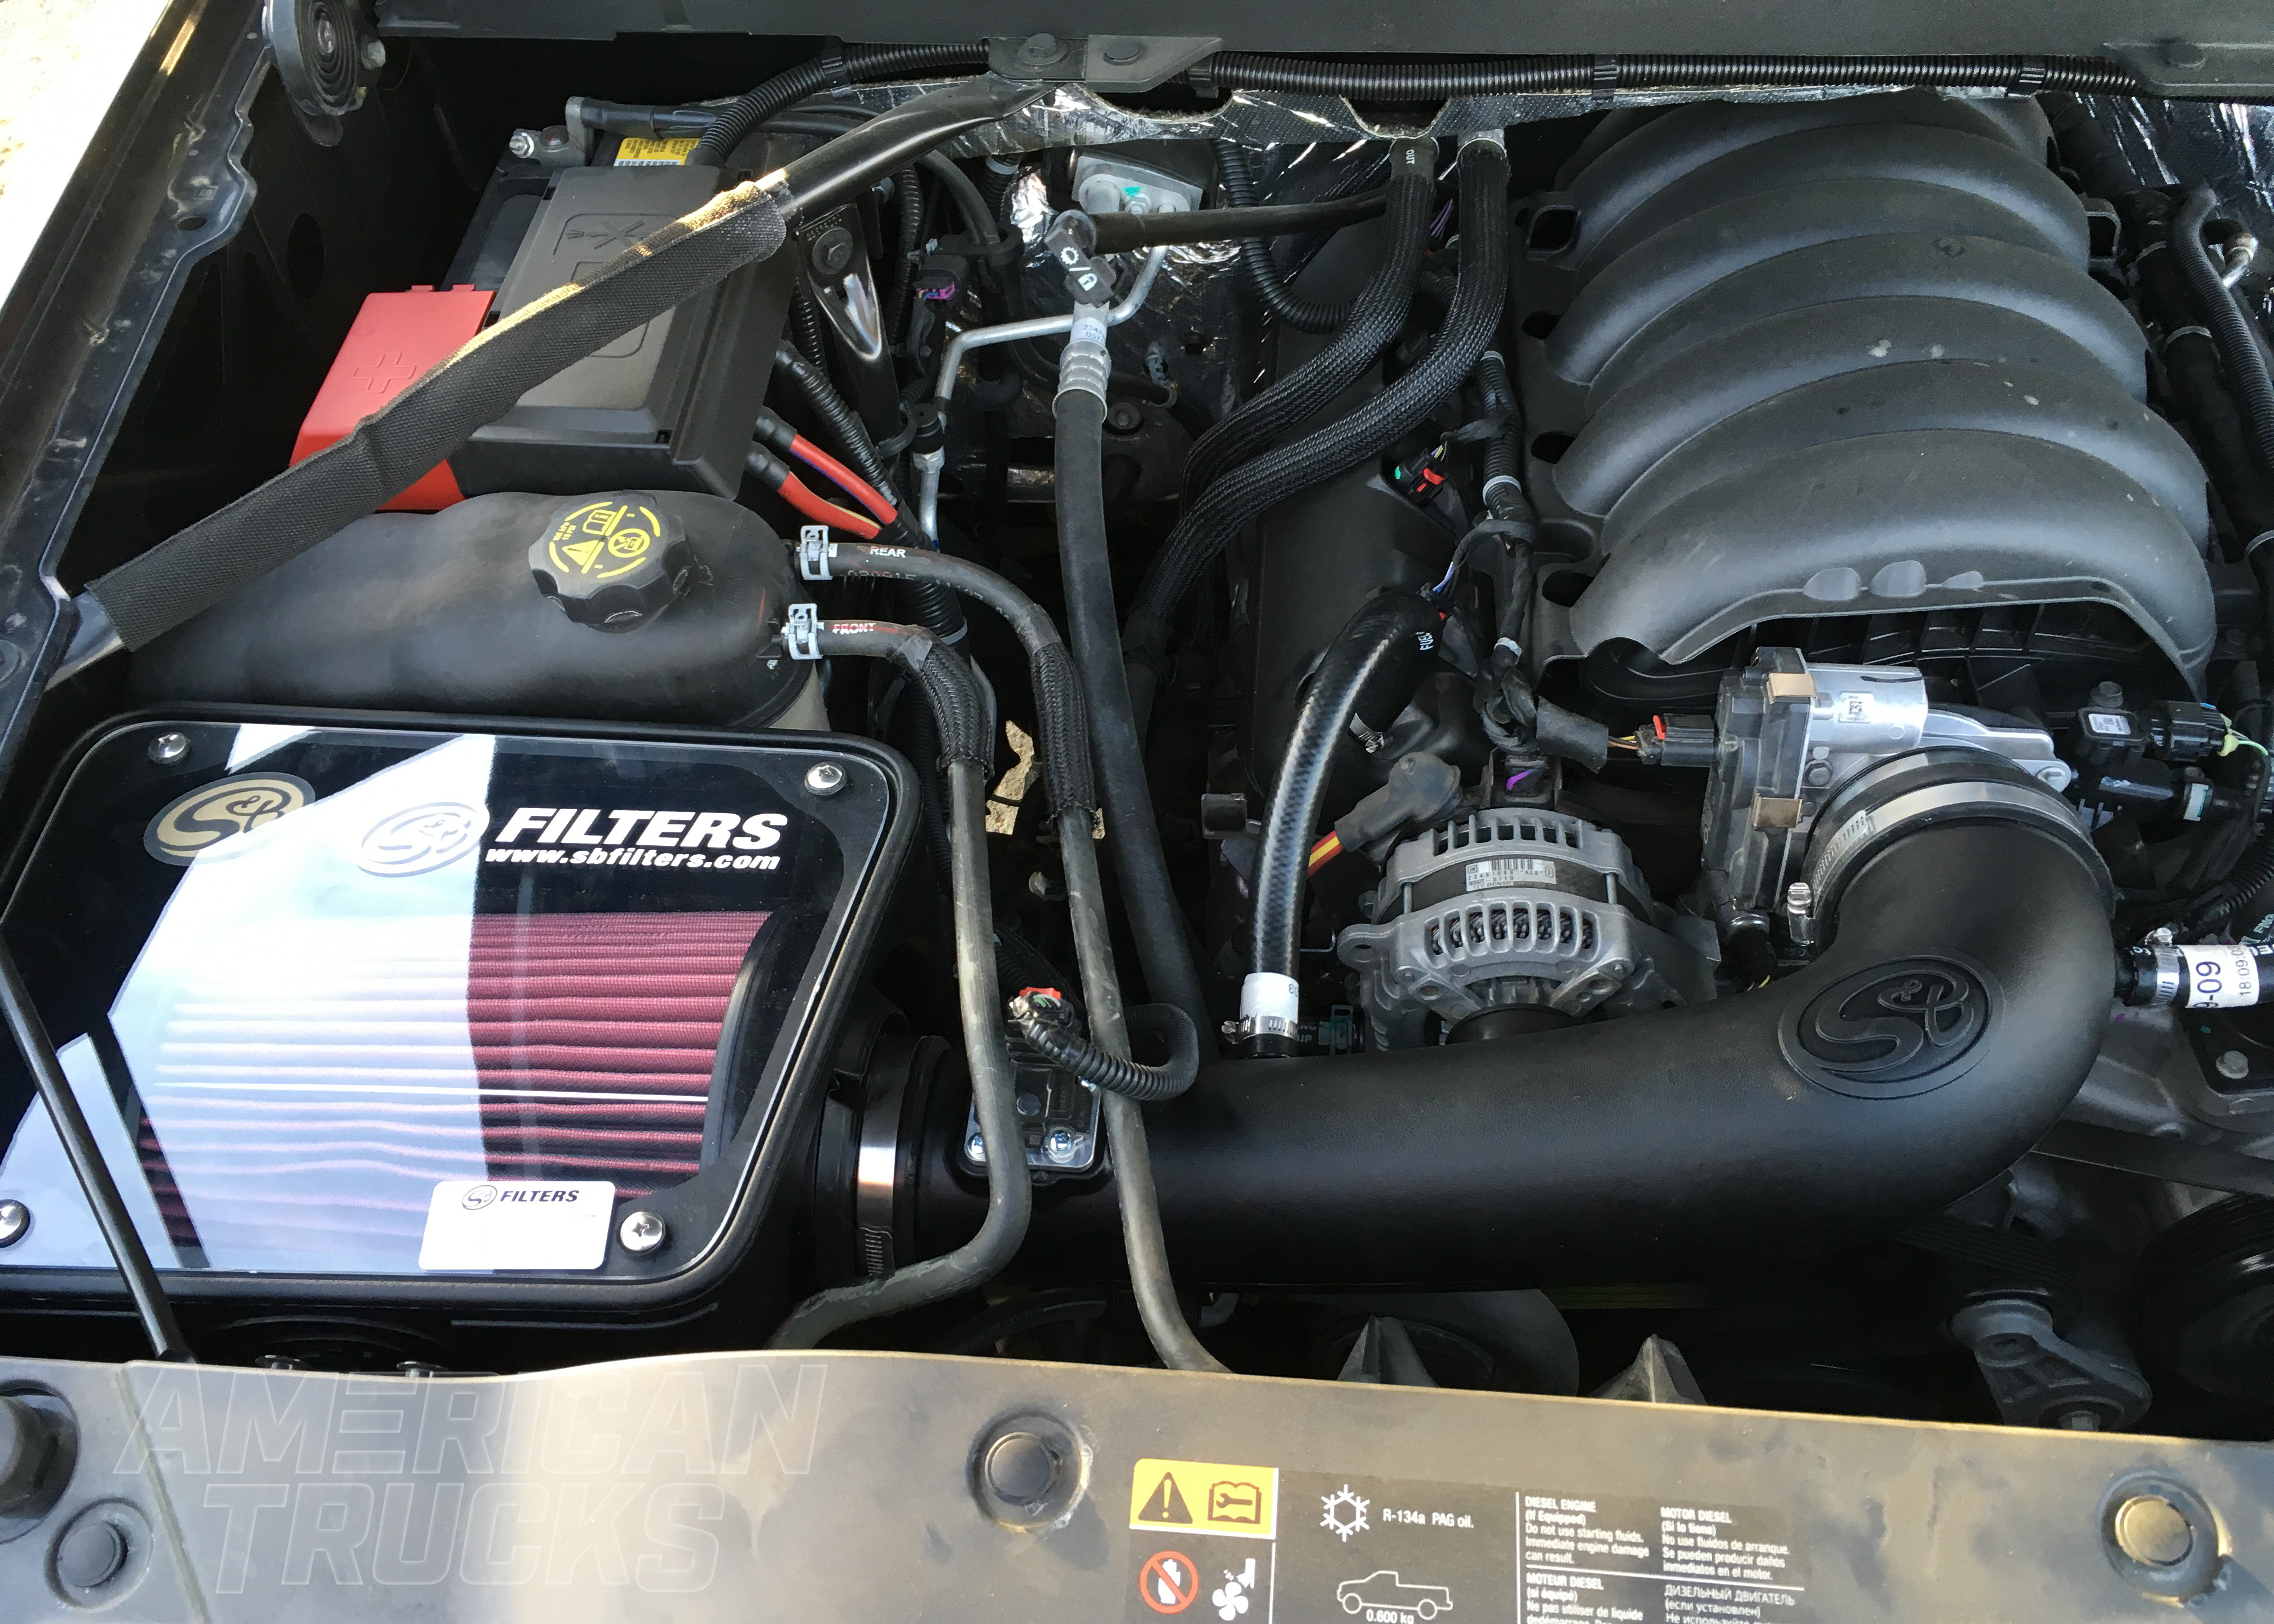 The Importance of your Silverado’s Cooling System